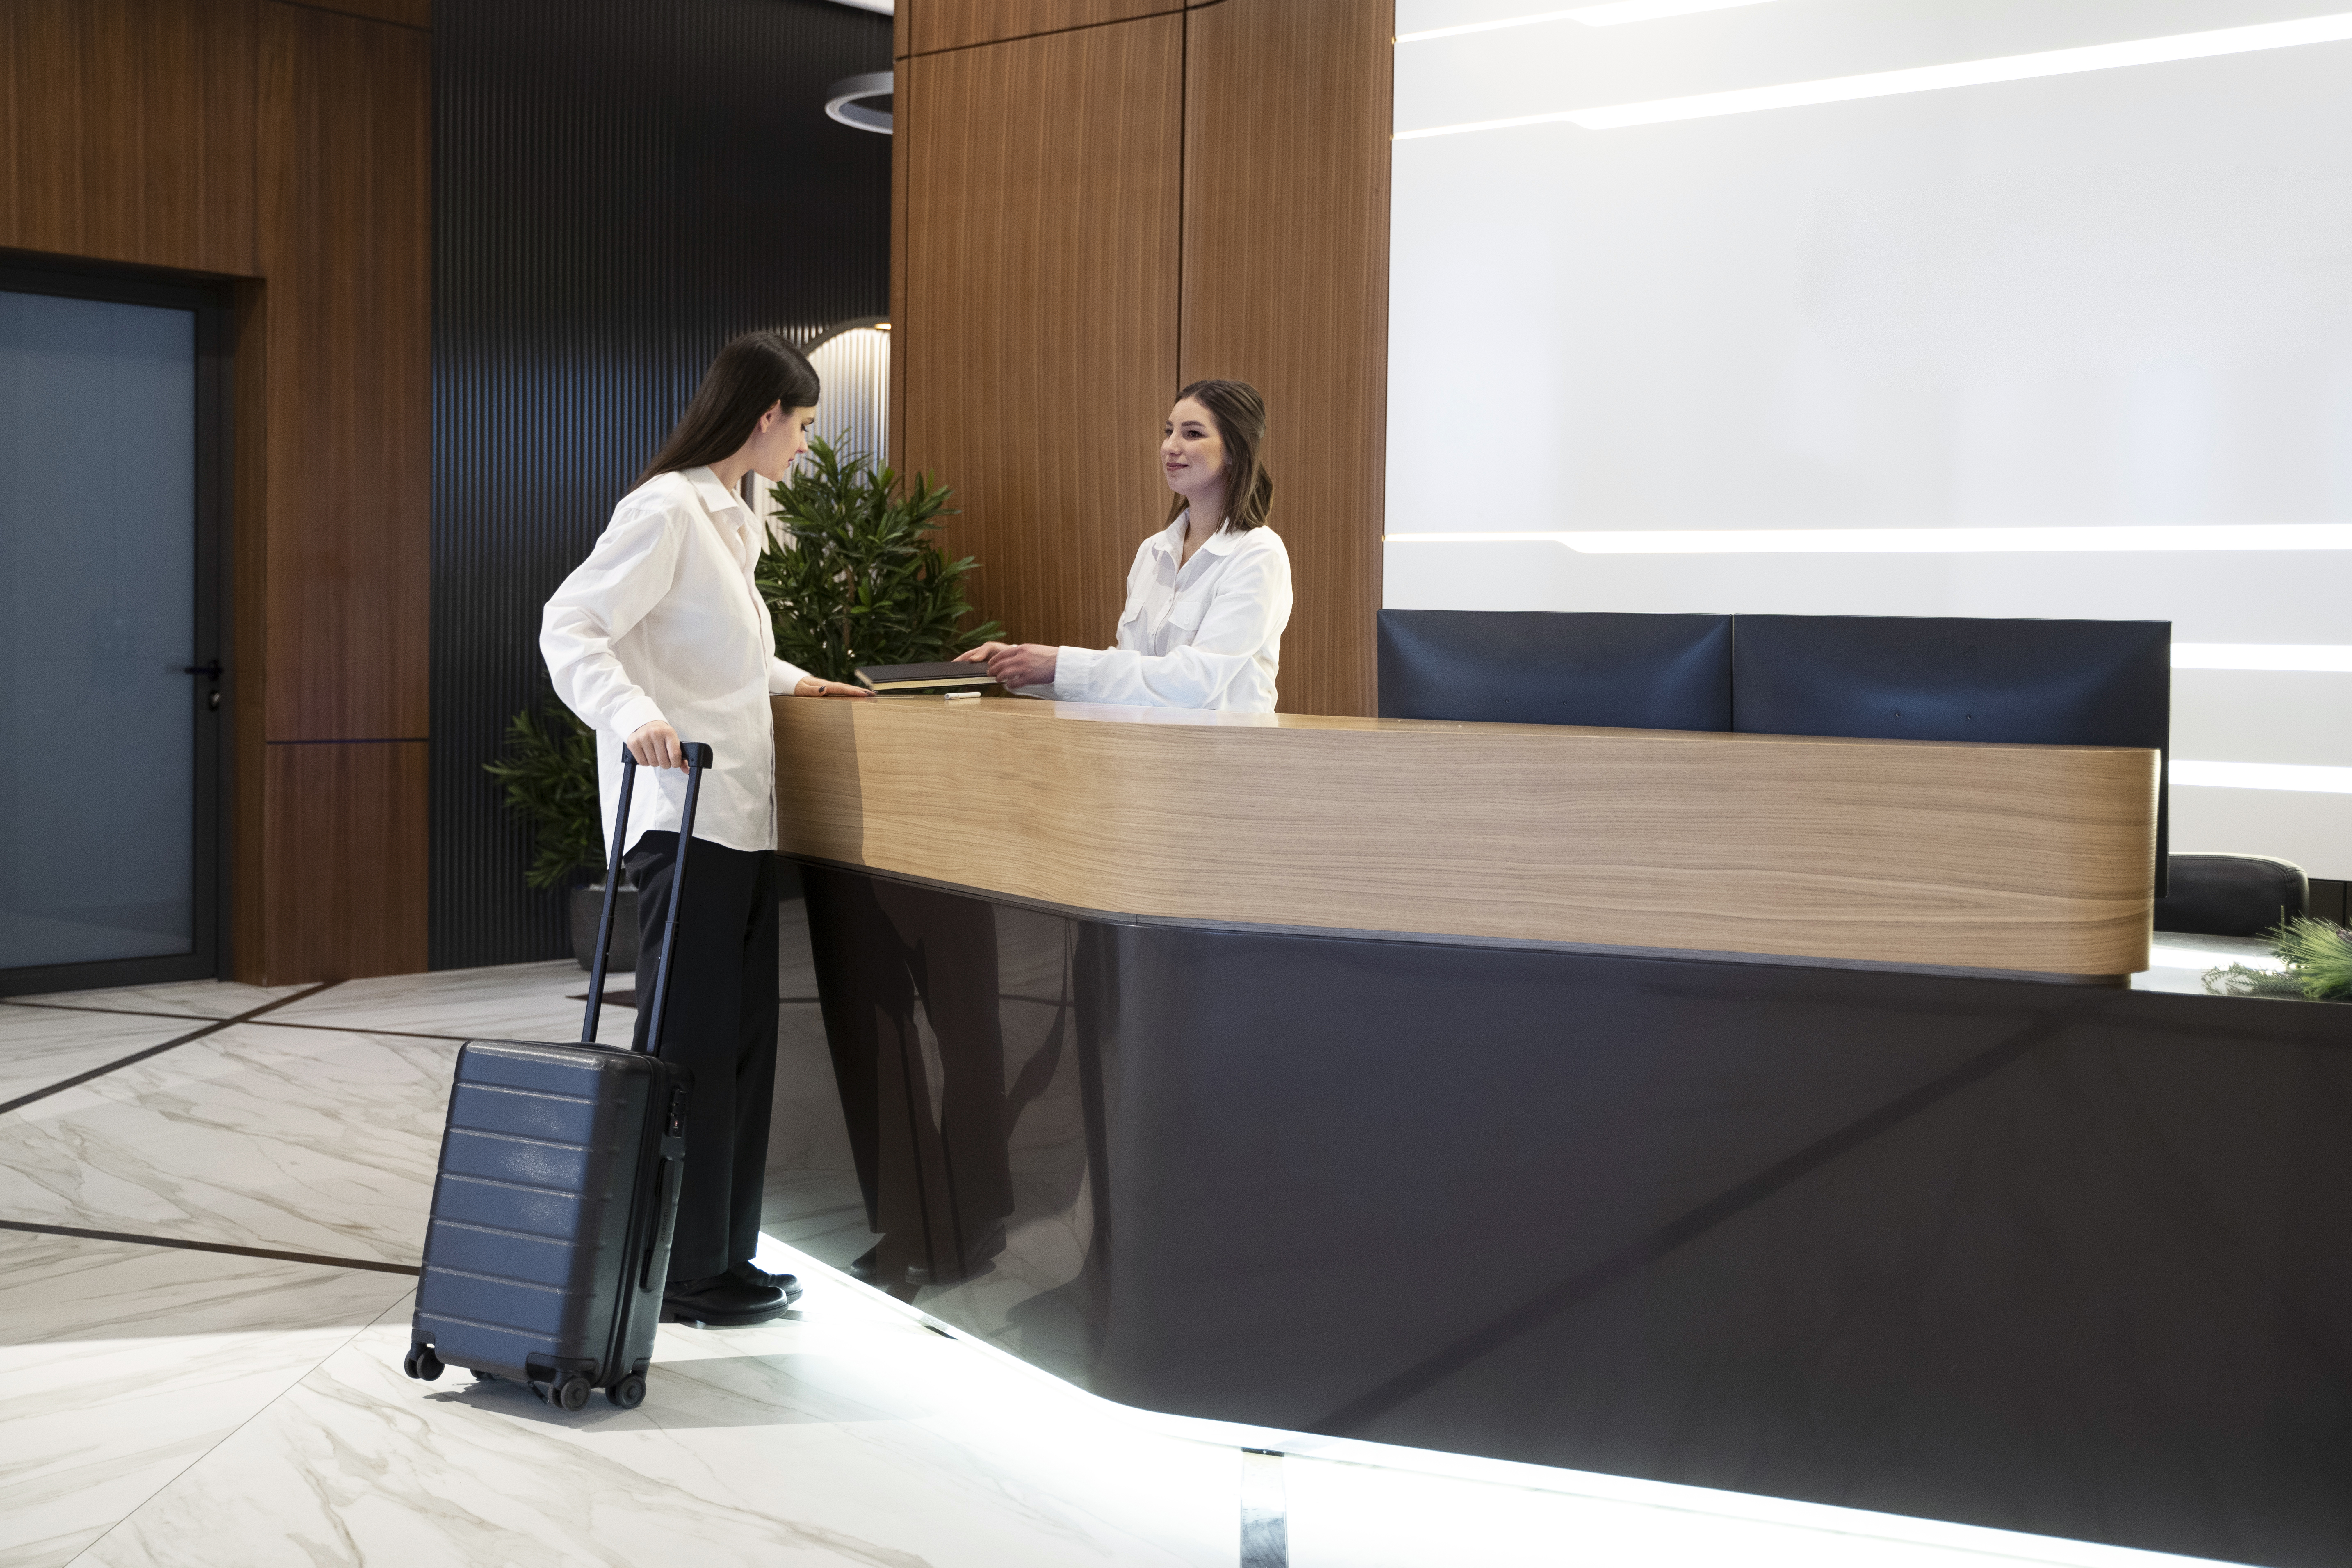 Louvre Hotels innovate & launches the self- service: easy Check-In/Out